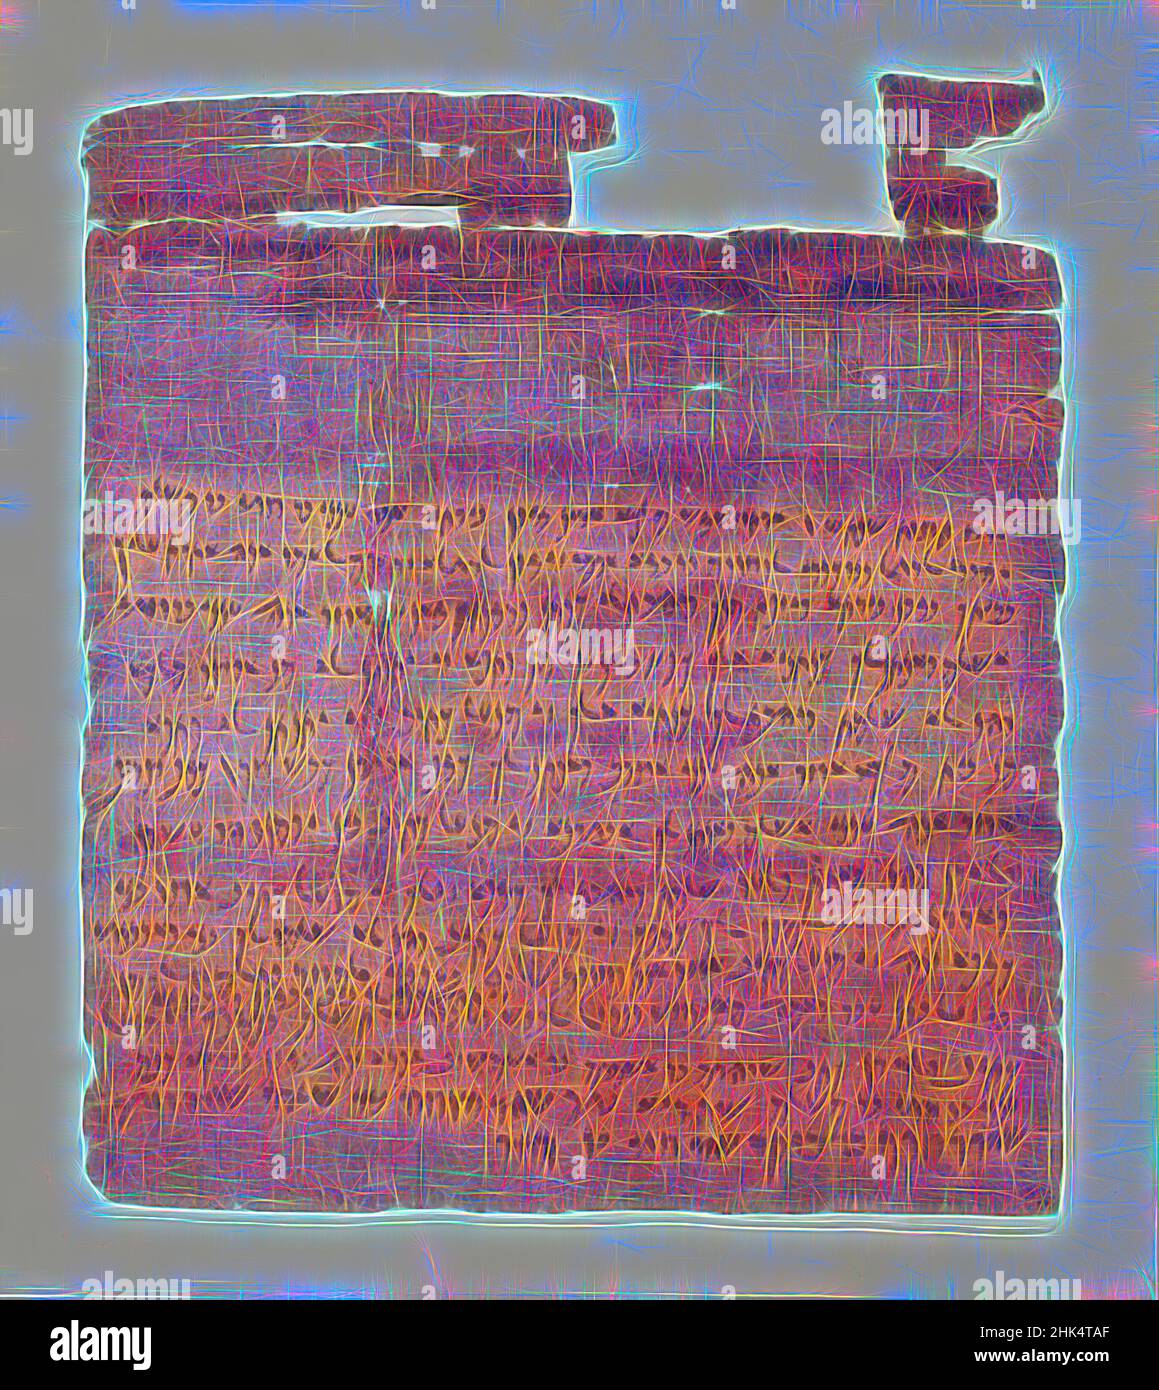 Inspired by Receipt for a Grain Loan, Aramaic, Papyrus, ink, mud, December, 402 B.C.E., Dynasty 28, Late Period, a: Glass: 14 15/16 x 16 1/4 in., 38 x 41.2 cm, agriculture, ancient, archaeology, commerce, document, Elephantine, Jewish, Jewish history, papyrus, purchase, record, text, trade, Reimagined by Artotop. Classic art reinvented with a modern twist. Design of warm cheerful glowing of brightness and light ray radiance. Photography inspired by surrealism and futurism, embracing dynamic energy of modern technology, movement, speed and revolutionize culture Stock Photo